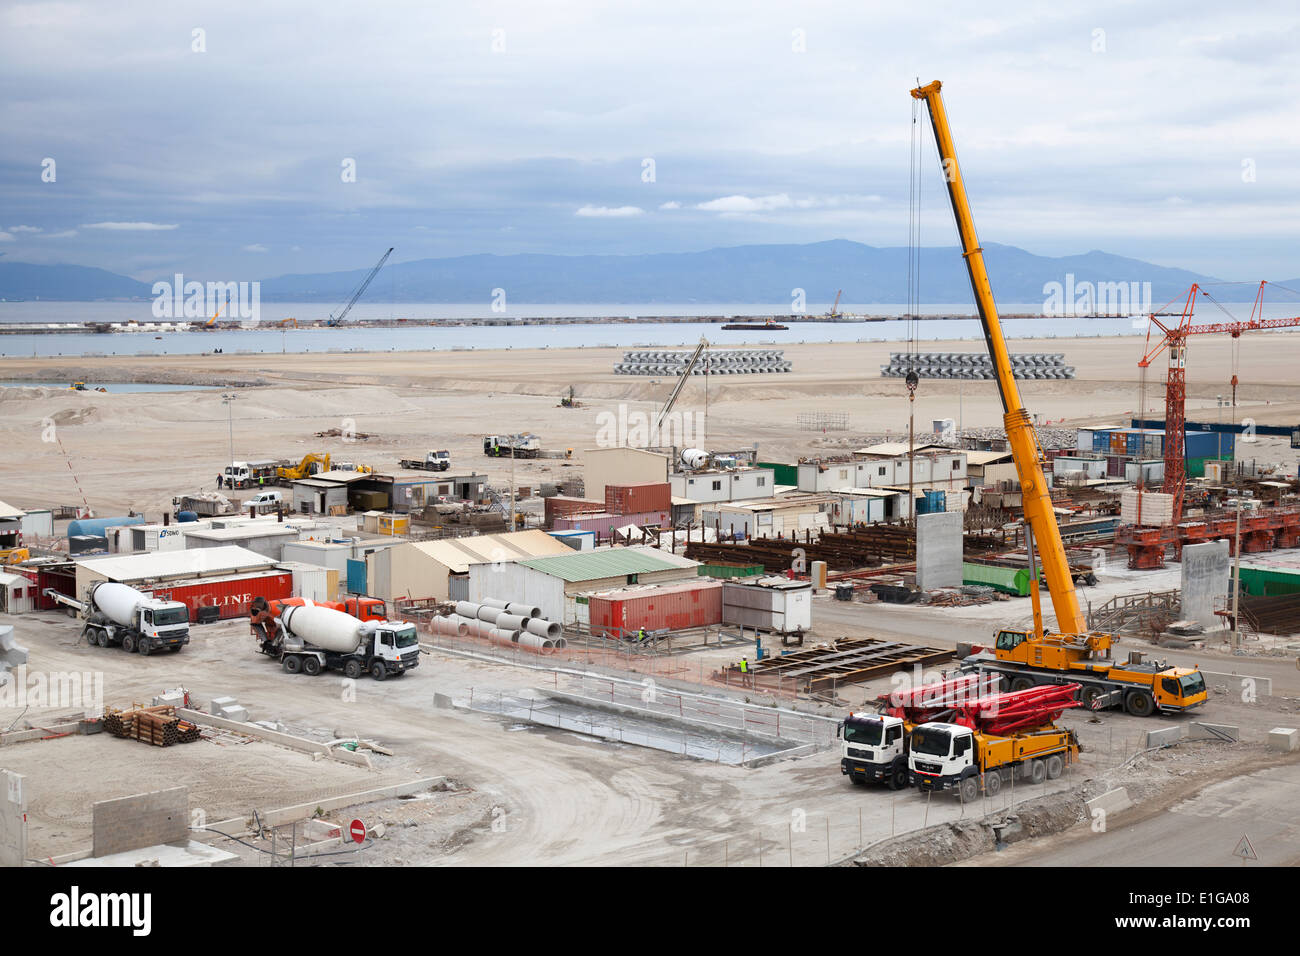 Tanger med new port terminal under construction, Morocco Stock Photo